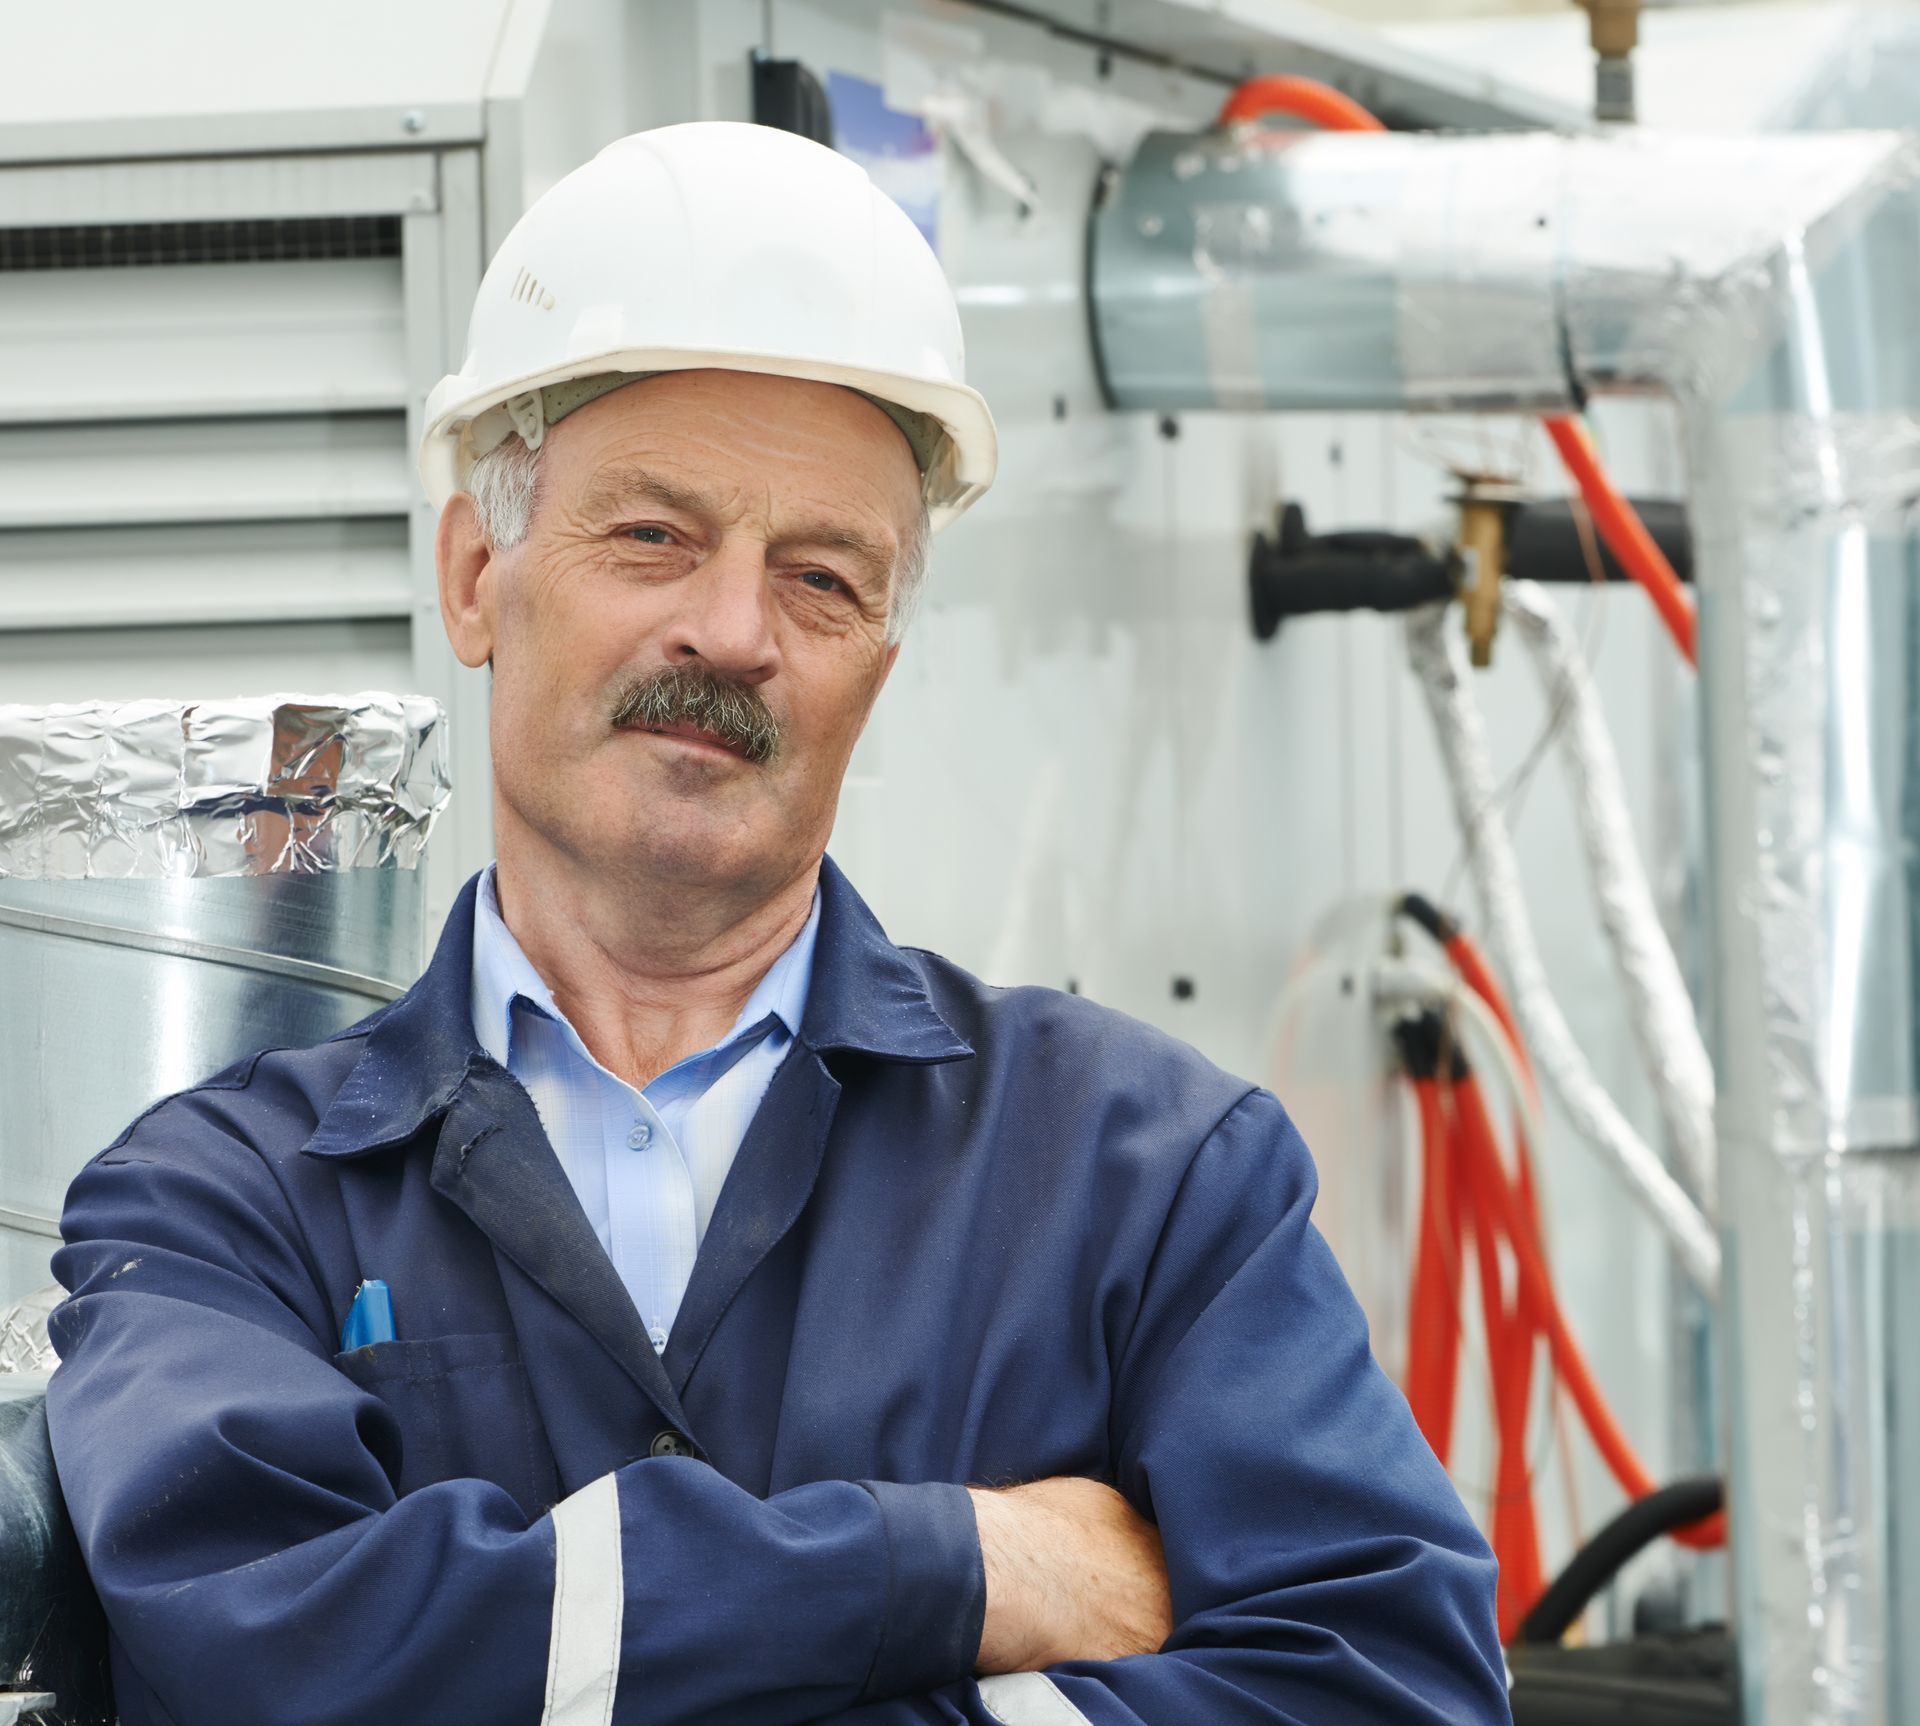 the technition poses for a head-on portrait, he smiles knowing the asnwer to the question how long do commercial HVAC systems last